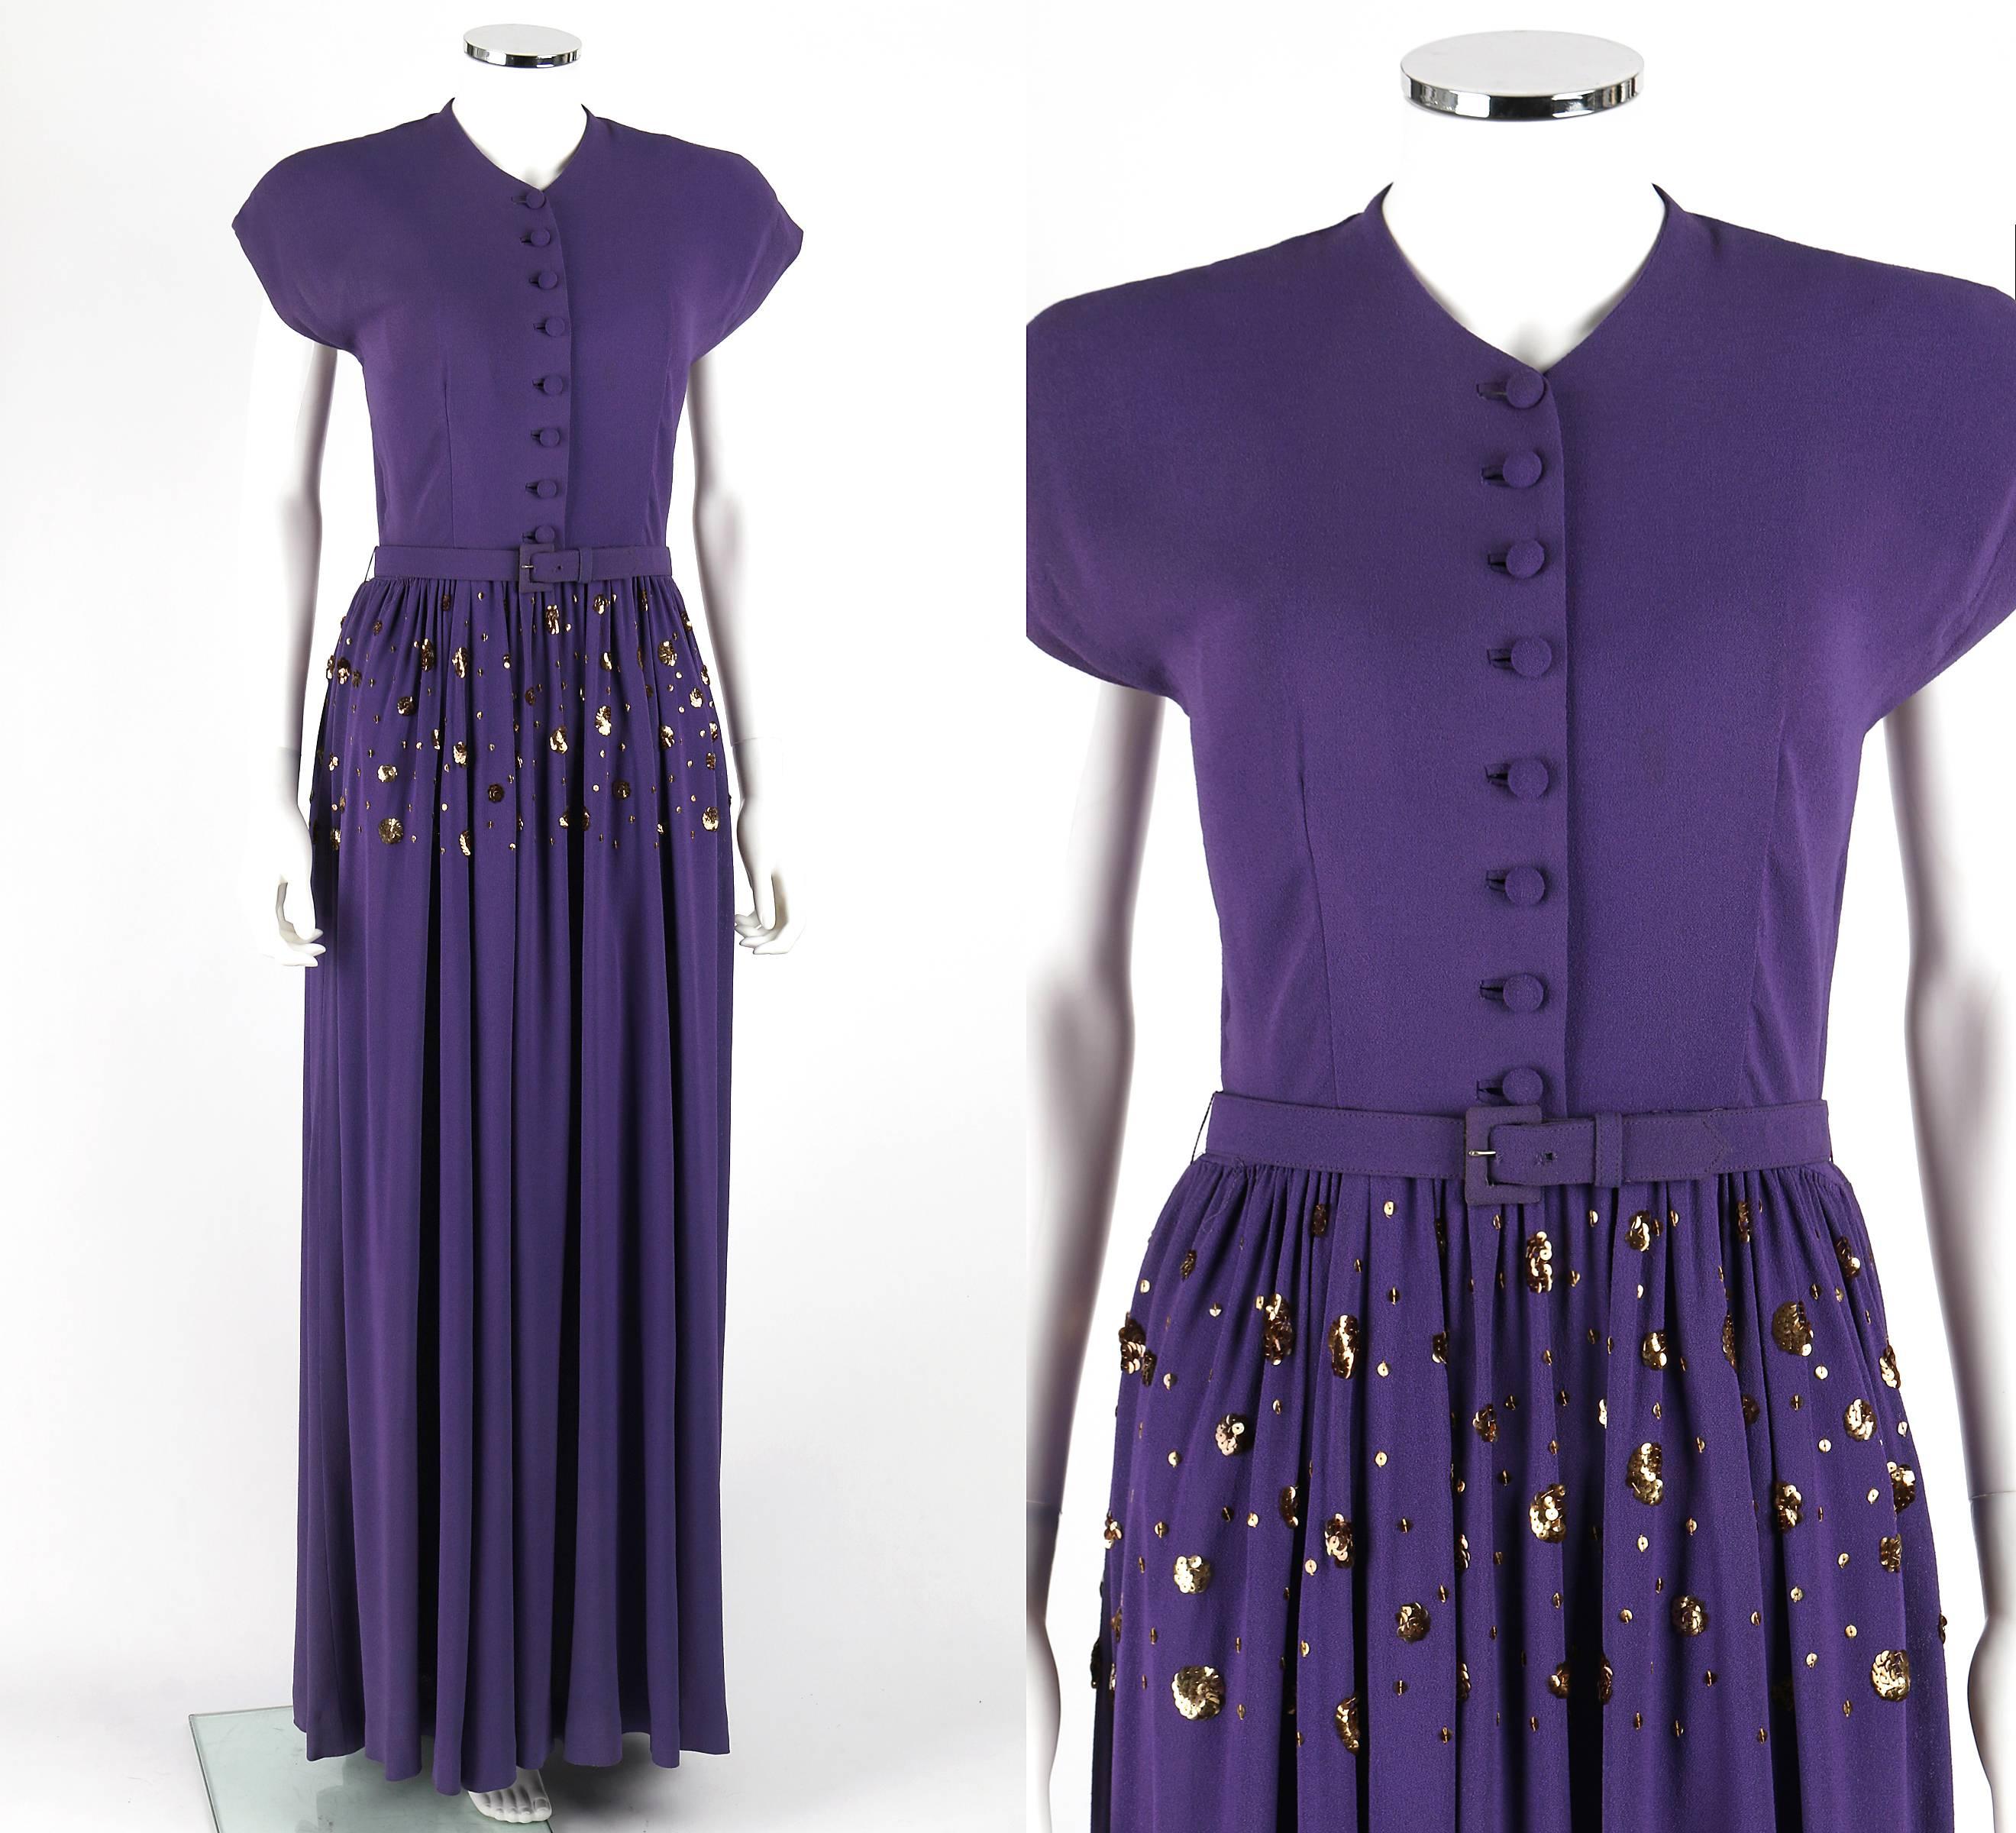 Vintage Couture c.1940's purple button front floor length evening gown. Extended shoulders. High v-neckline. Eight center front covered dome button closures. Gold sequin polka dot embellishment at hips. Gathered skirt. Side seam metal zipper